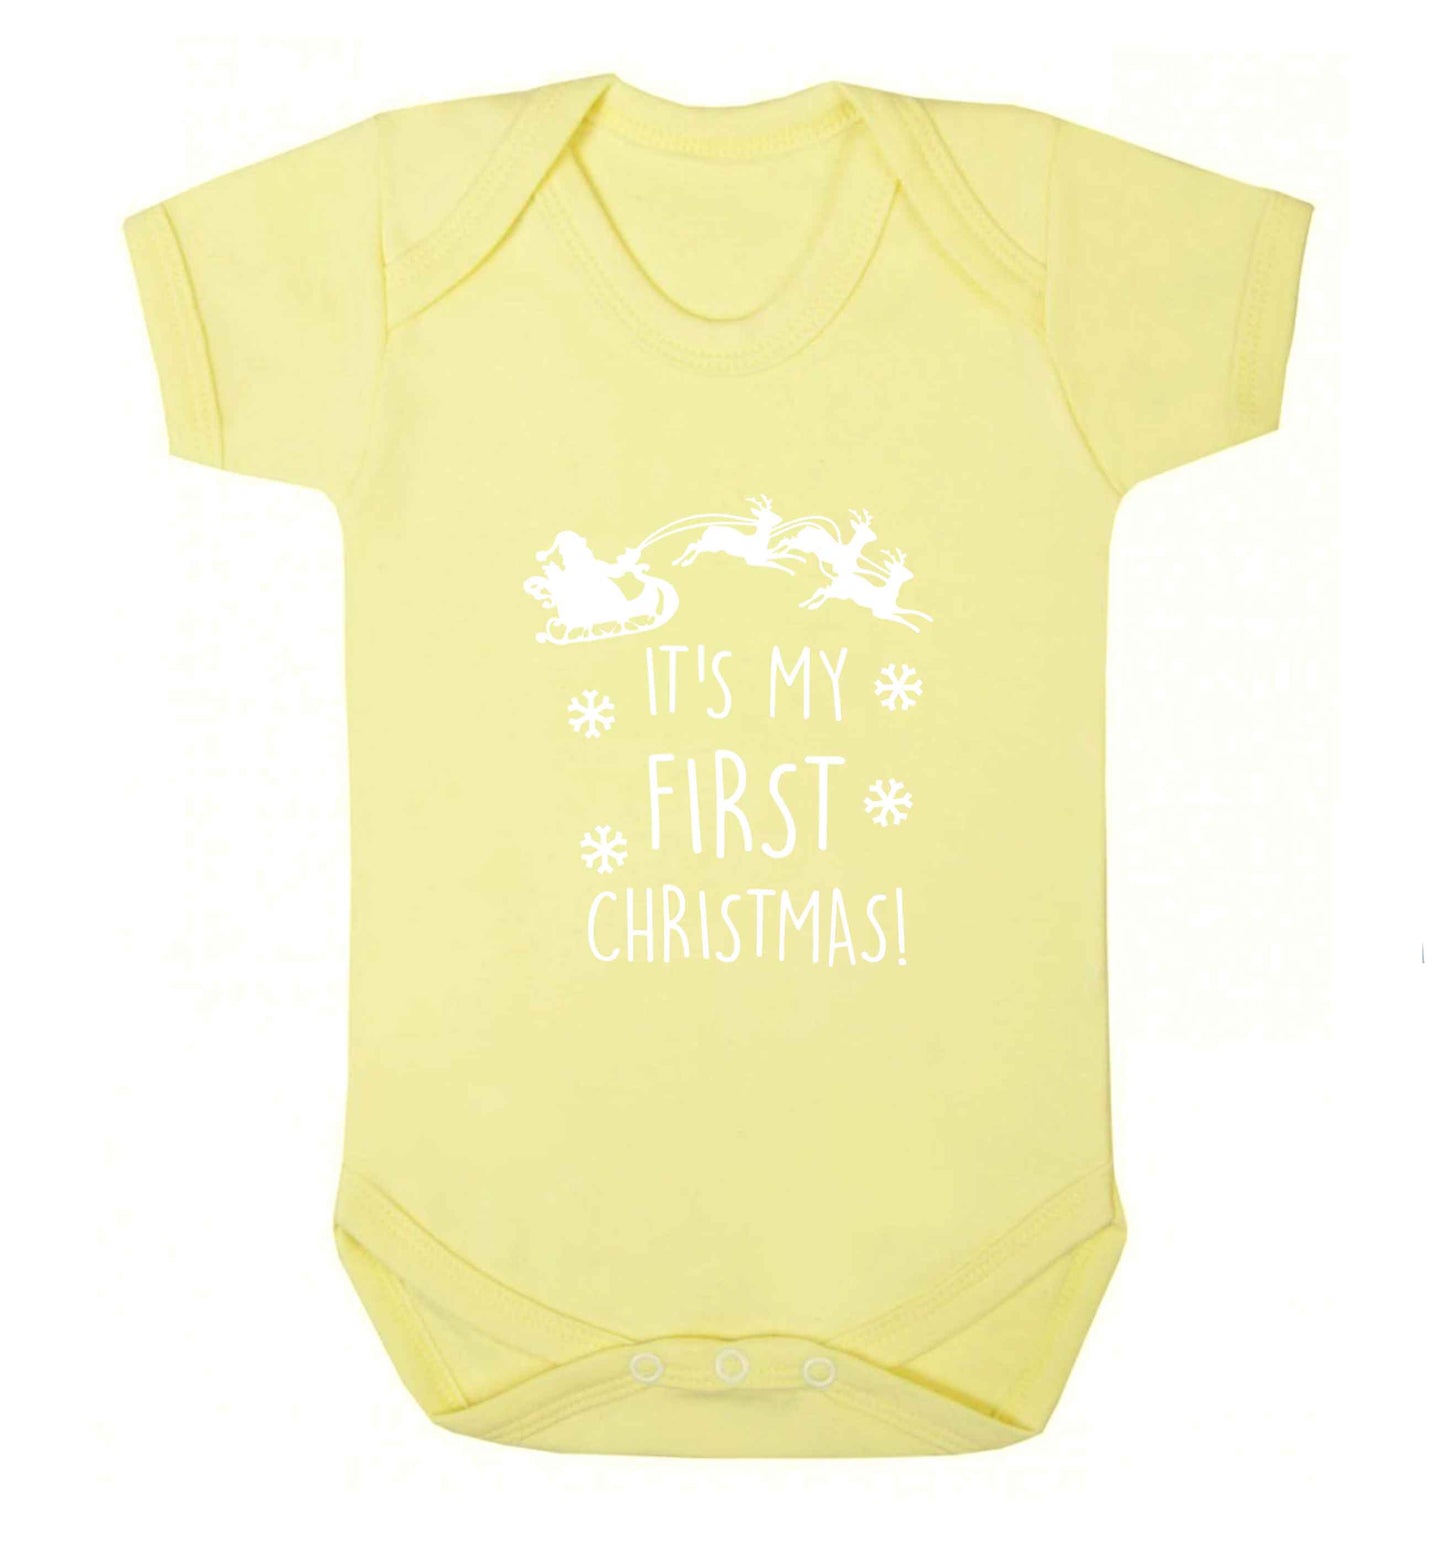 It's my first Christmas - Santa sleigh text baby vest pale yellow 18-24 months